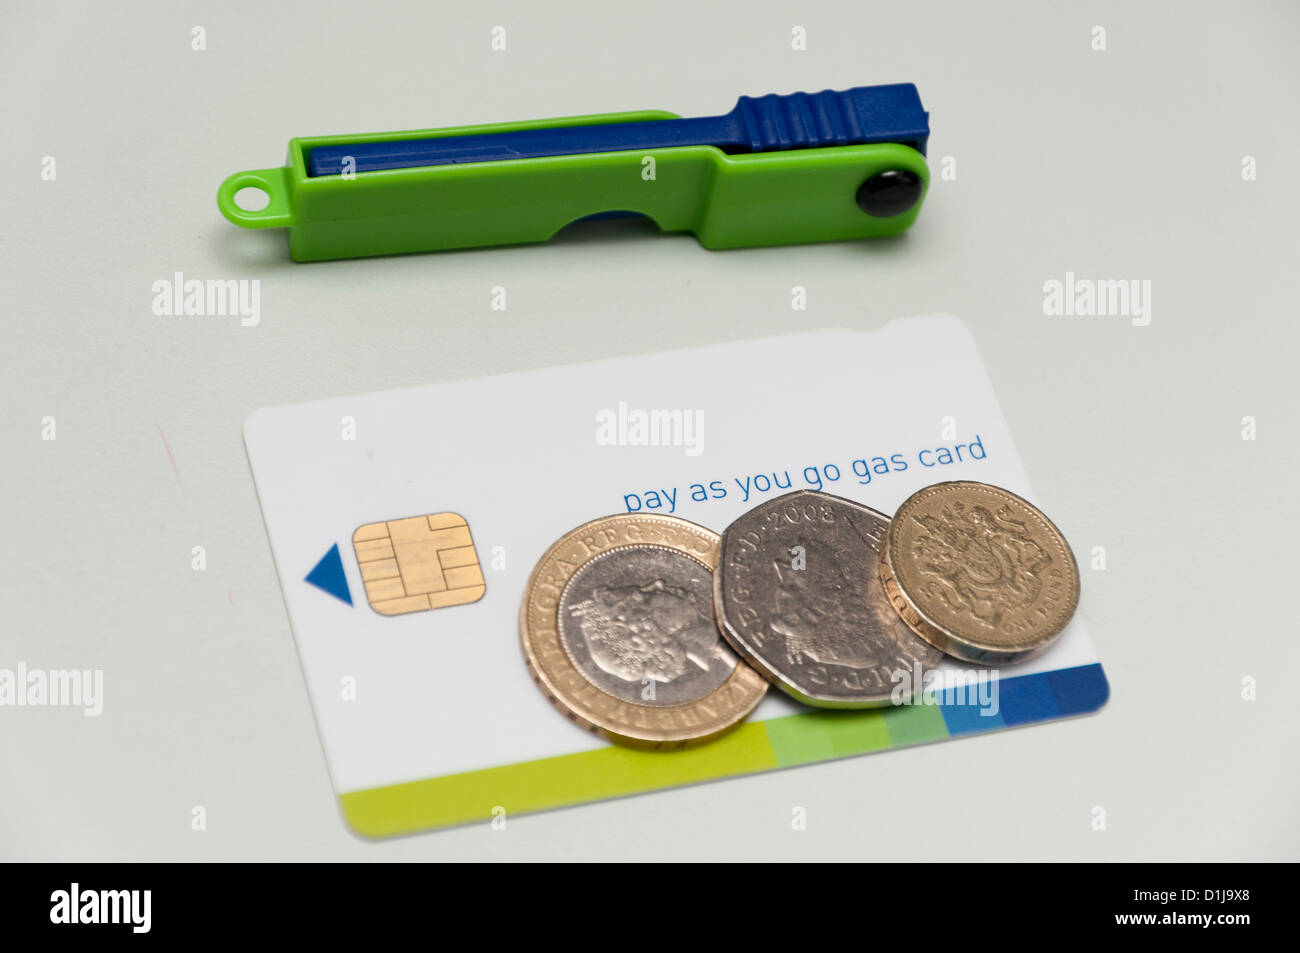 Fuel energy key for pay as you go meter. Stock Photo